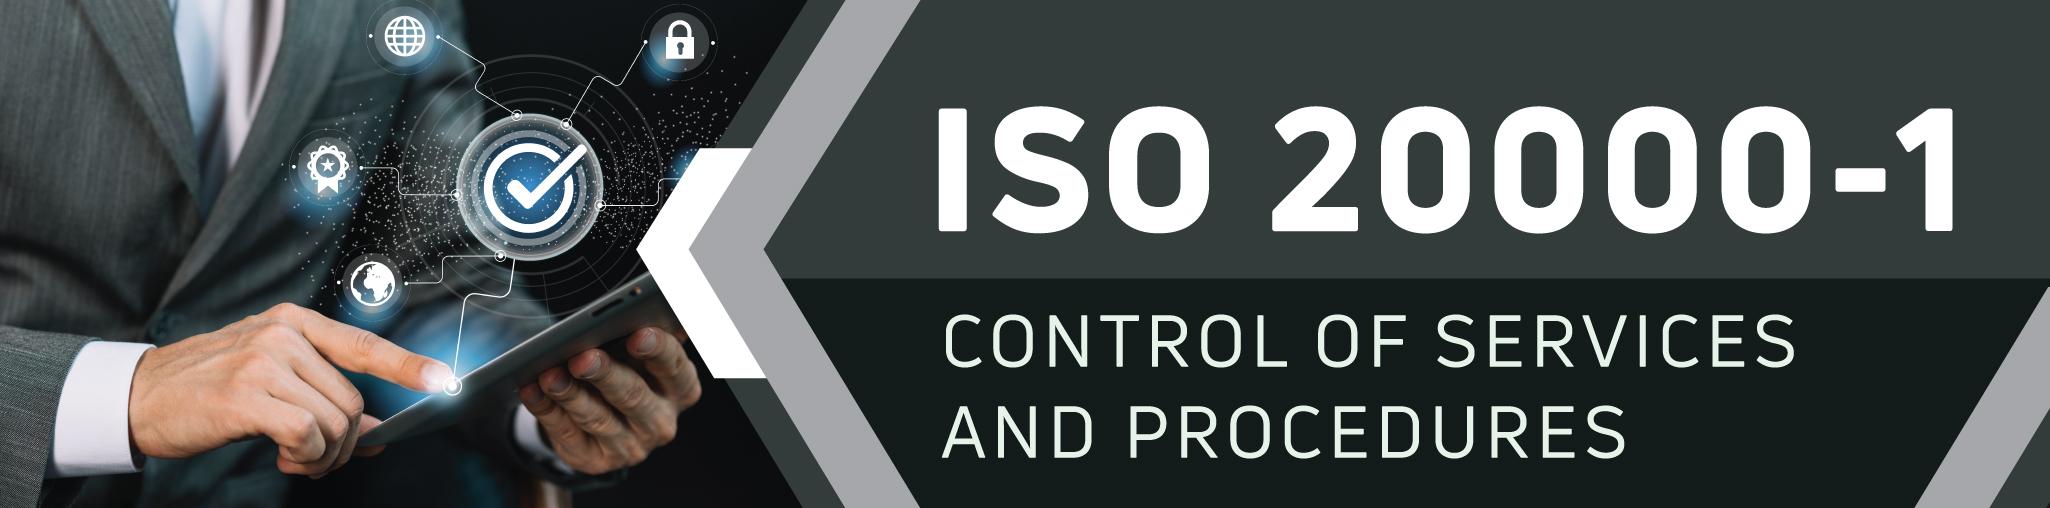 ISO 20000-1 Control of Services and Procedures